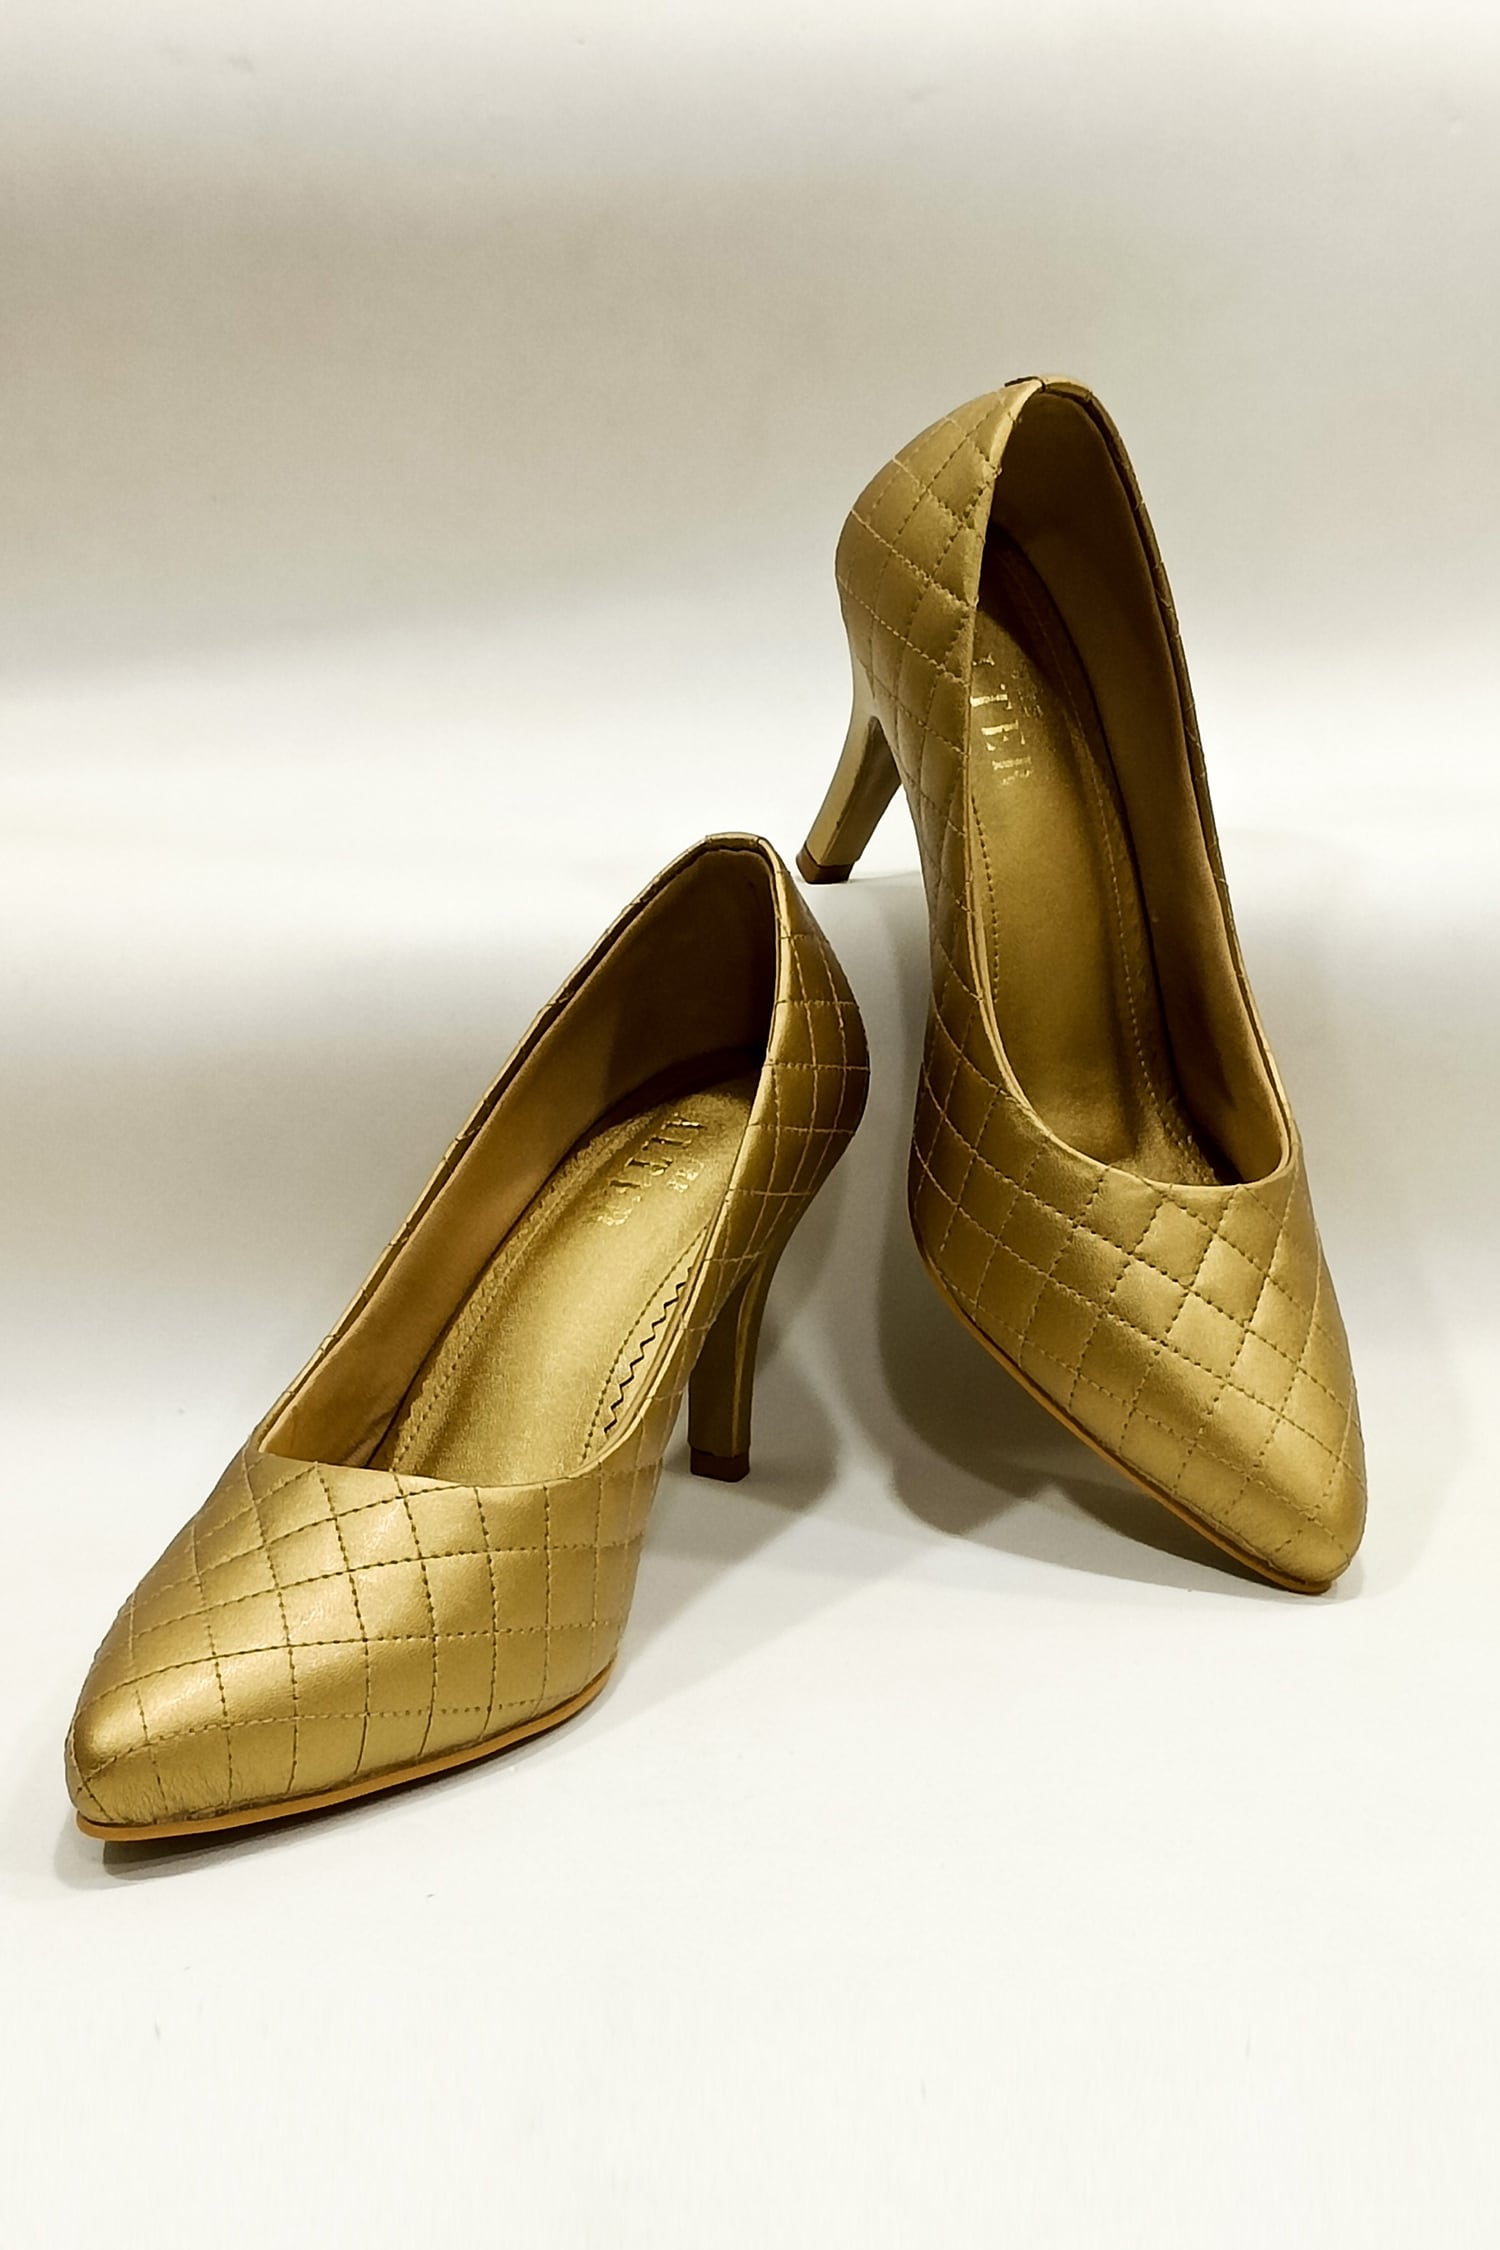 THE ALTER Gold Faux Leather / Non Leather Amora Quilted Pump Stiletto Heels